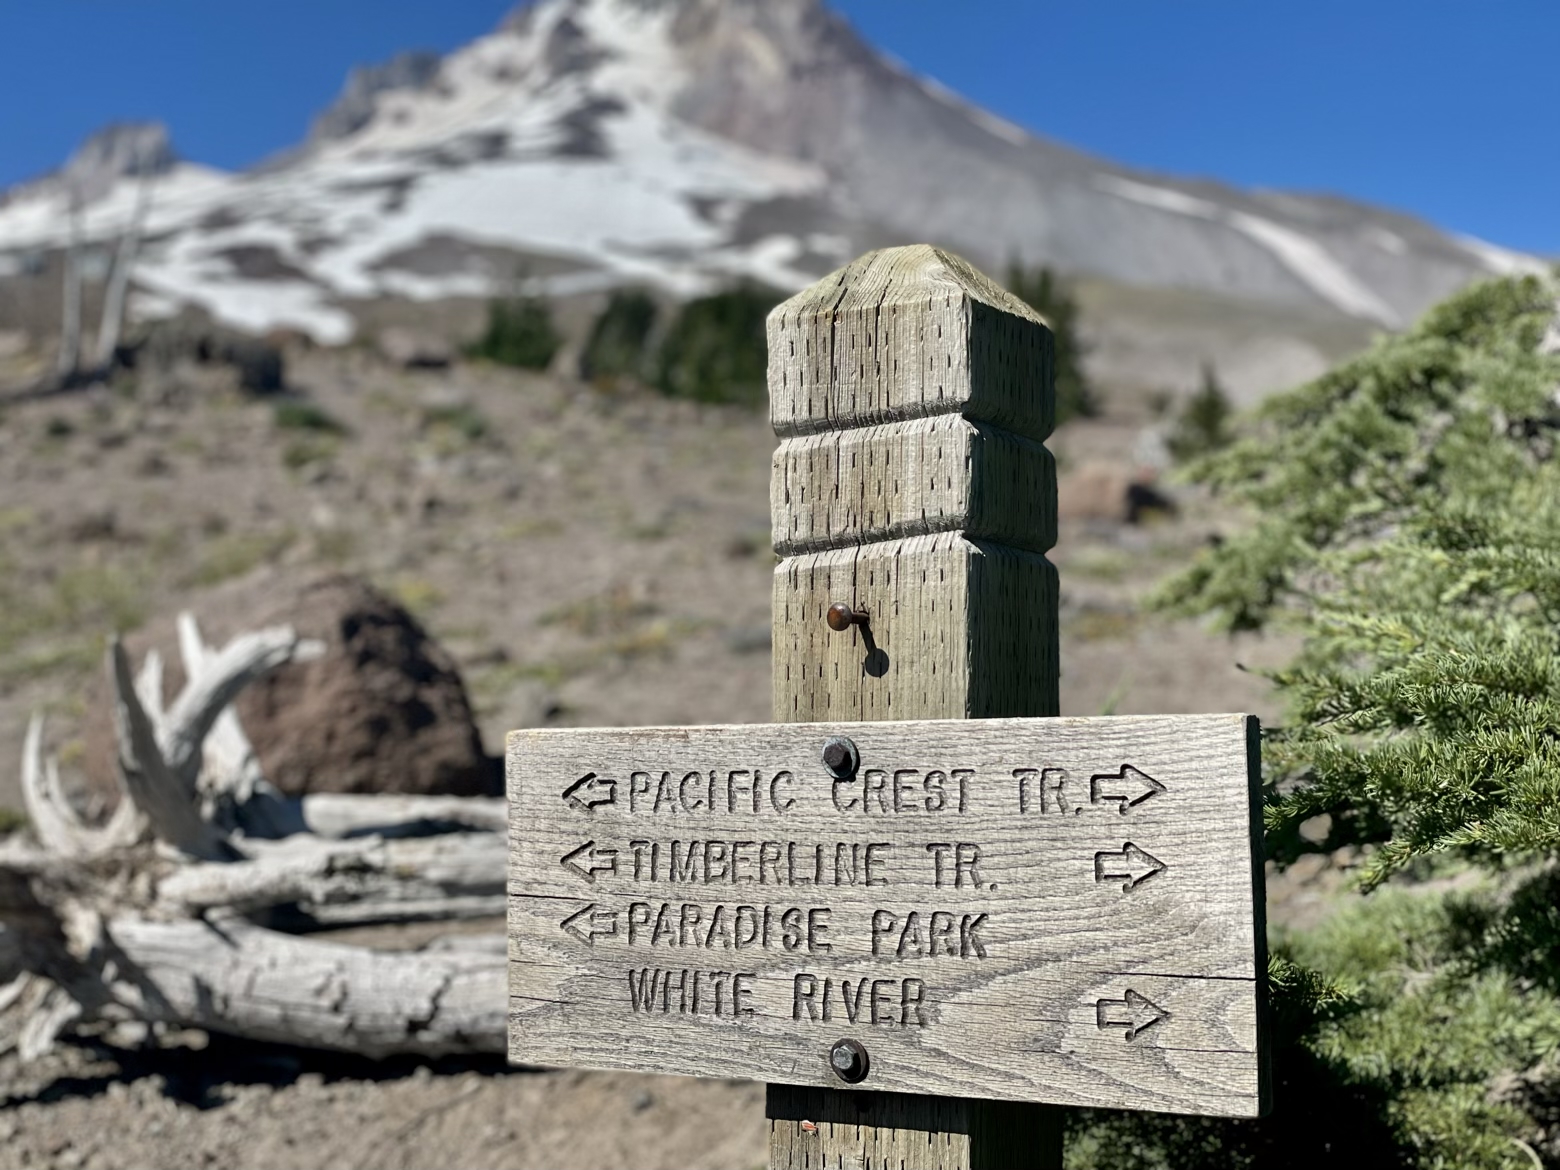 Pacific Crest Trail, meet Timberline Trail